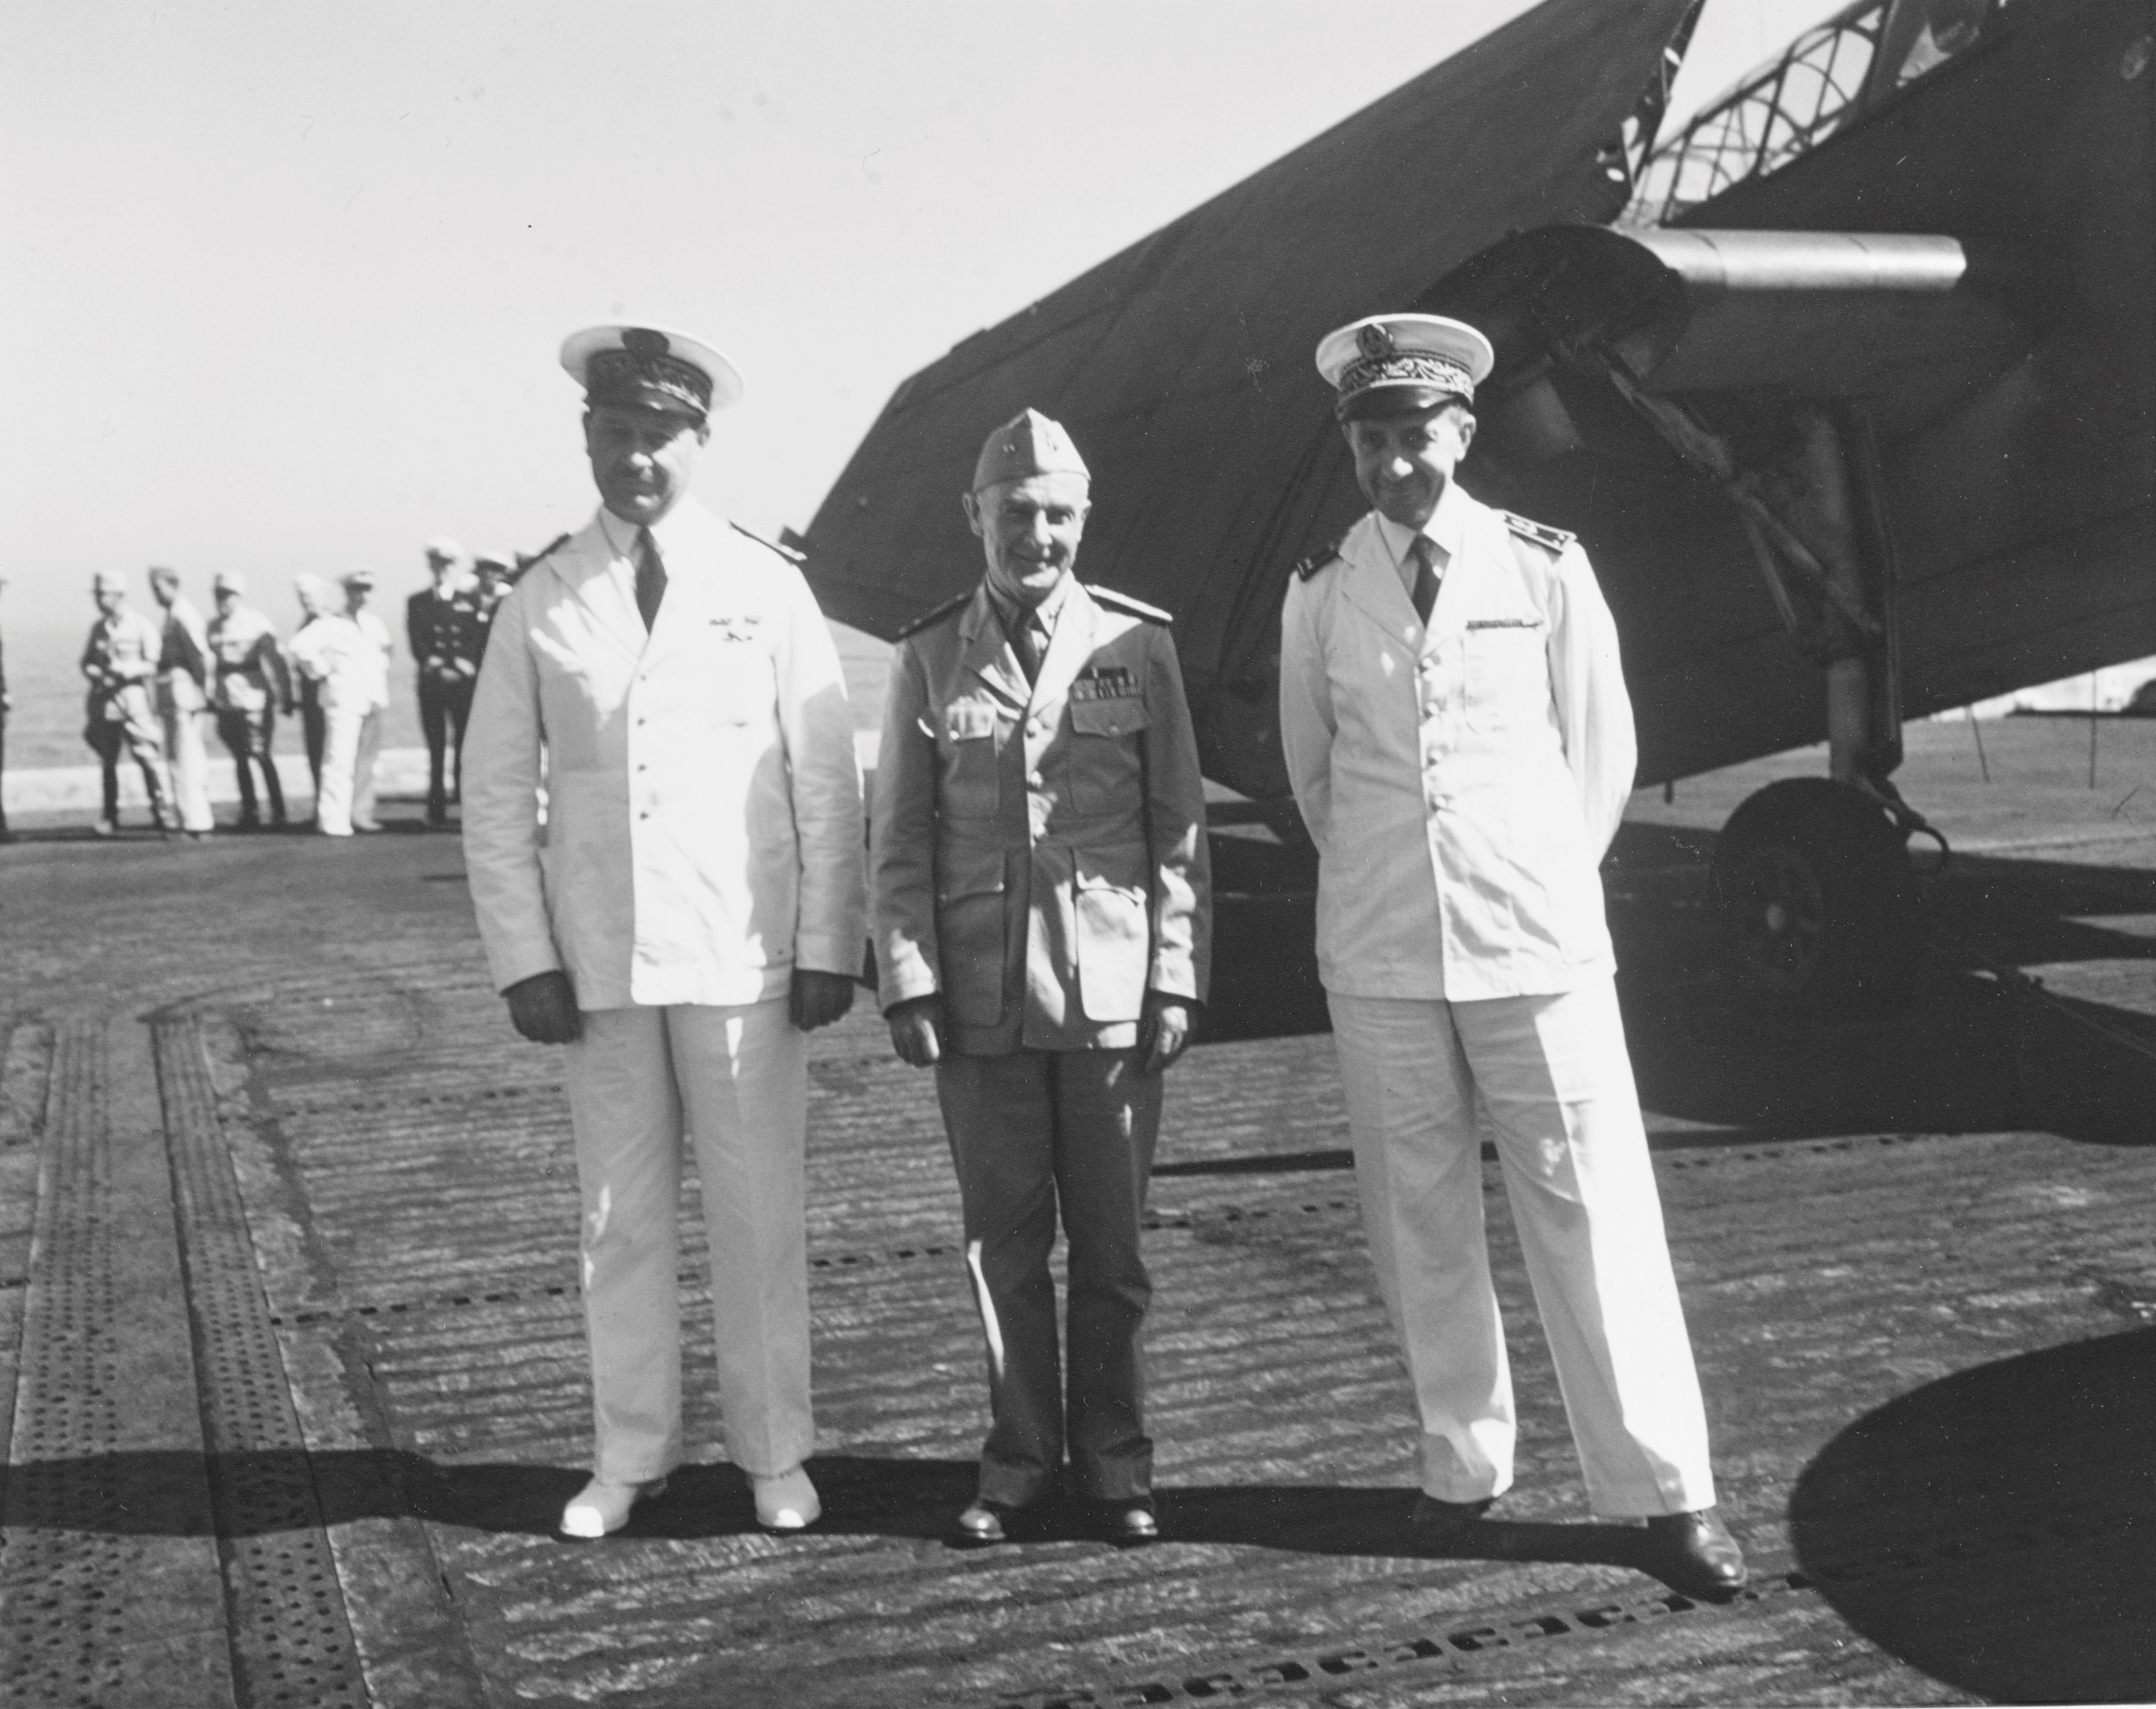 On the flight deck of USS Card in front of a TBF Avenger, US Navy Rear Admiral Frank Lowry (center) is flanked by two Rear Admirals of the French Navy, C.A. Ronarc’h (left) and Jacques Missoffe, Casablanca, 4 Jun 1943.